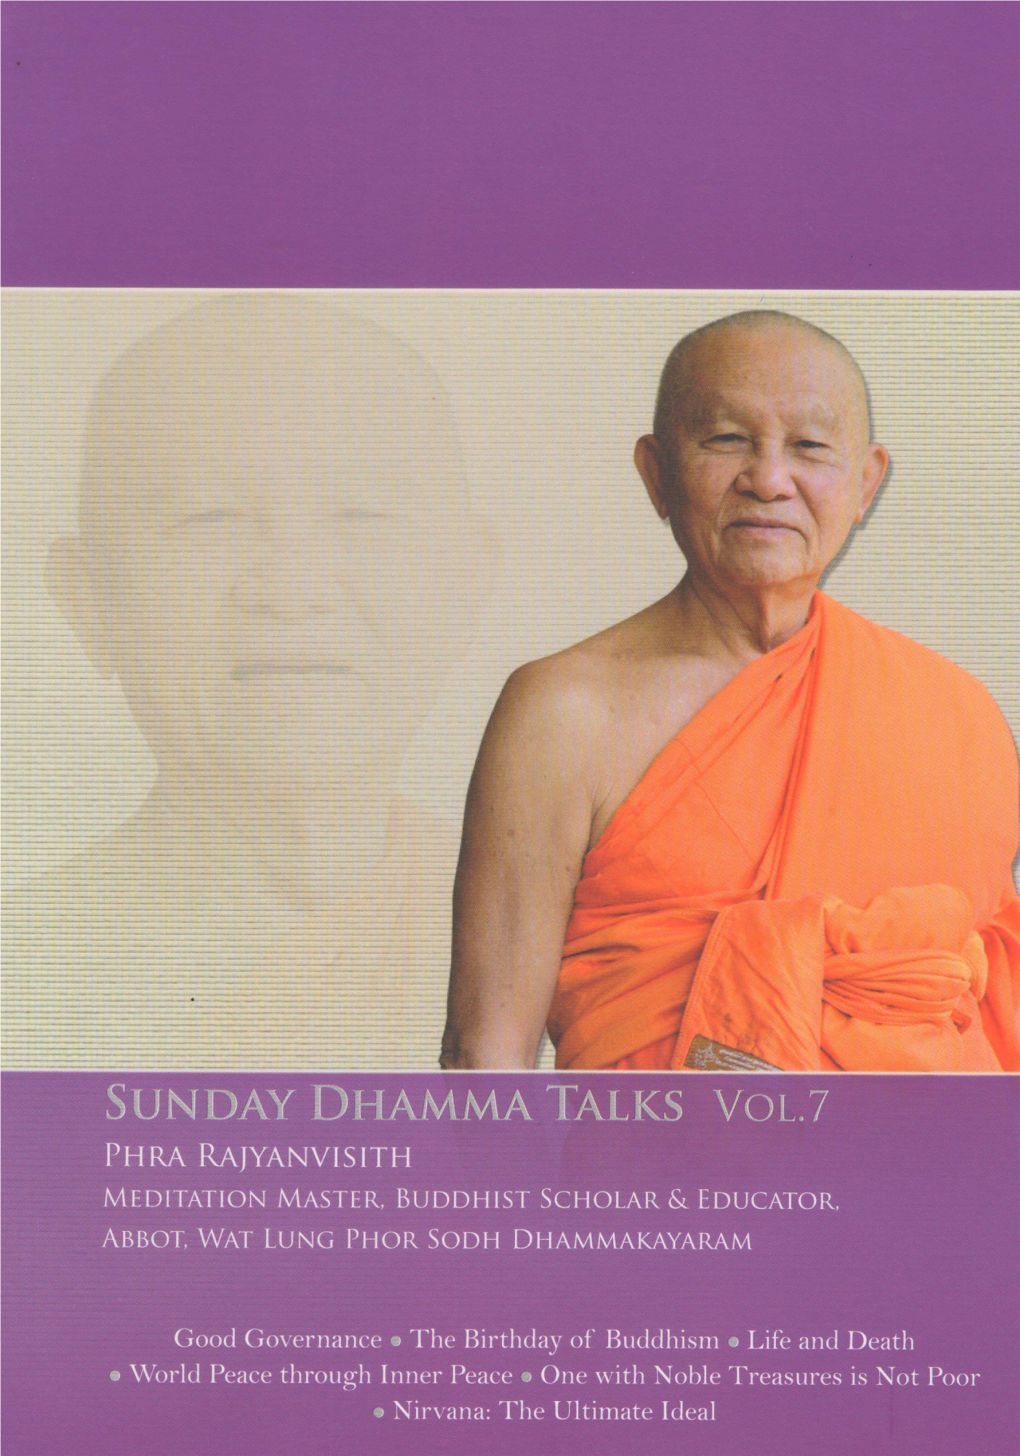 Content New.Indd -.: Dhamma Center